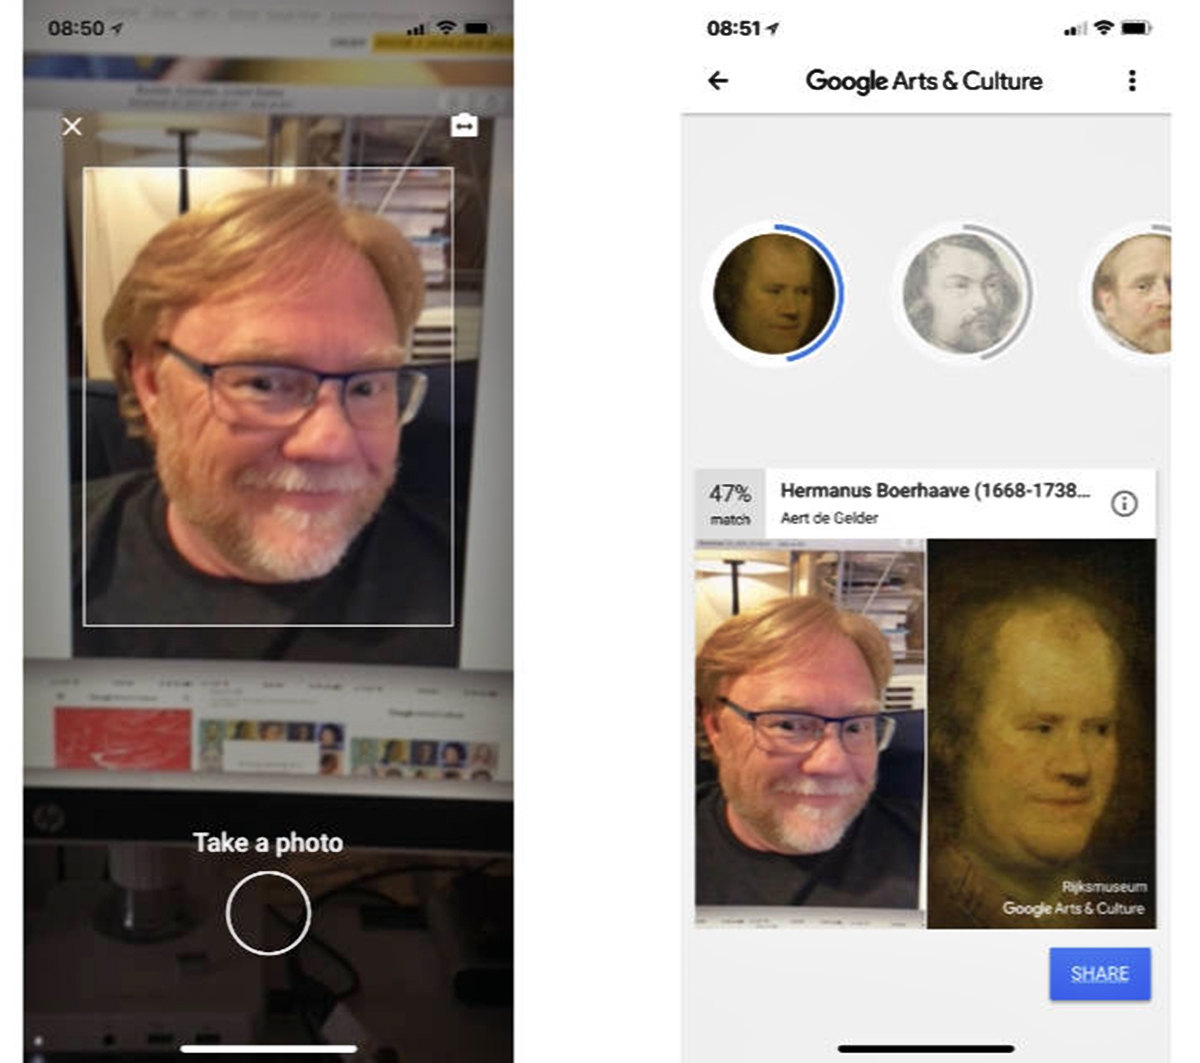 find-your-art-history-doppelganger-with-google-arts-culture